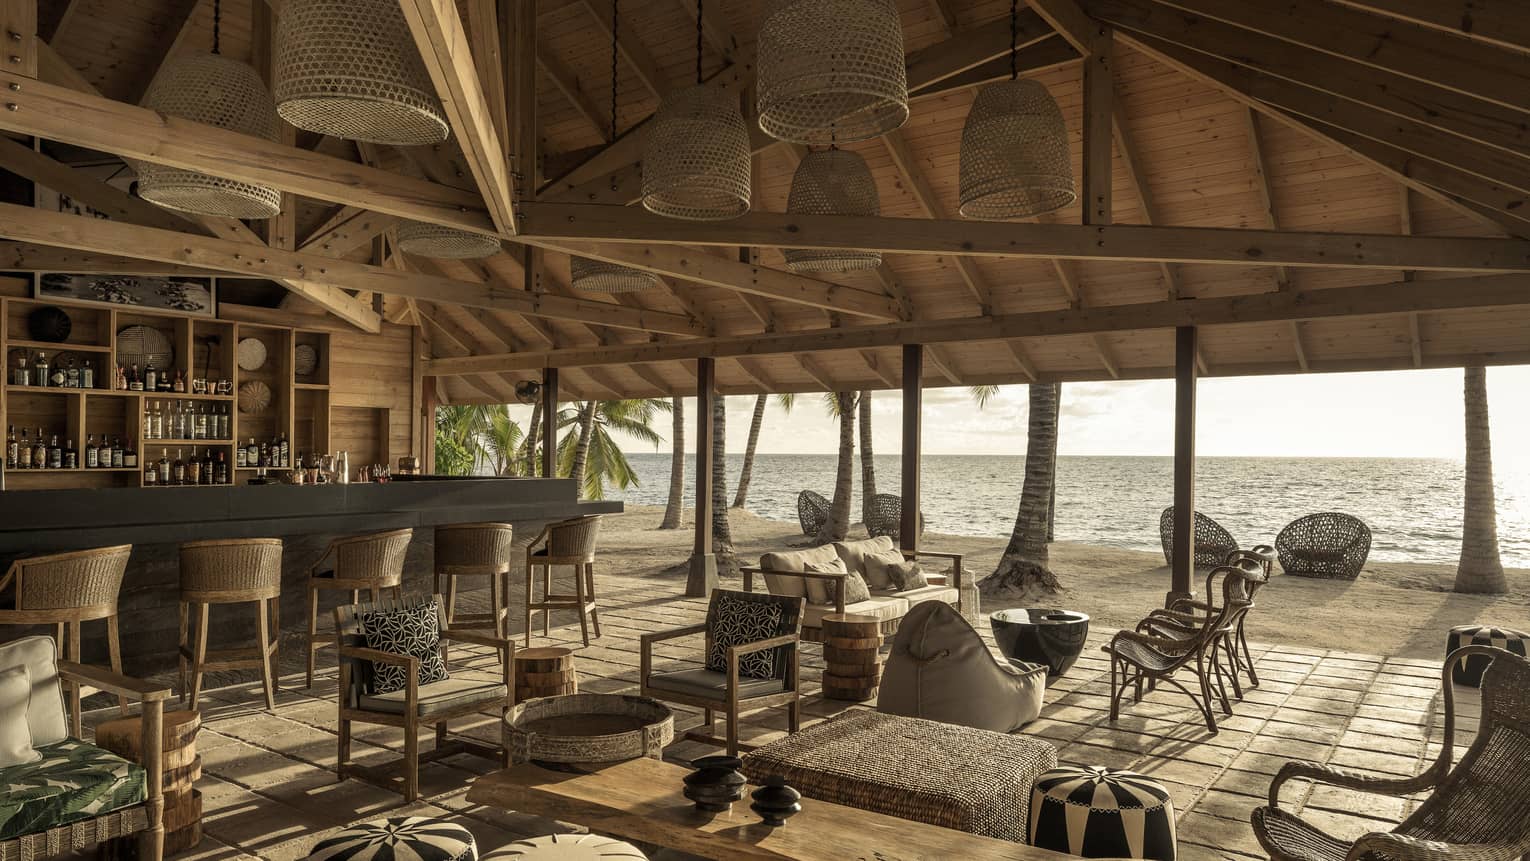 Bar with bar stools and lounge with grouped seating under vaulted wooden ceiling with open-air view of beach and ocean